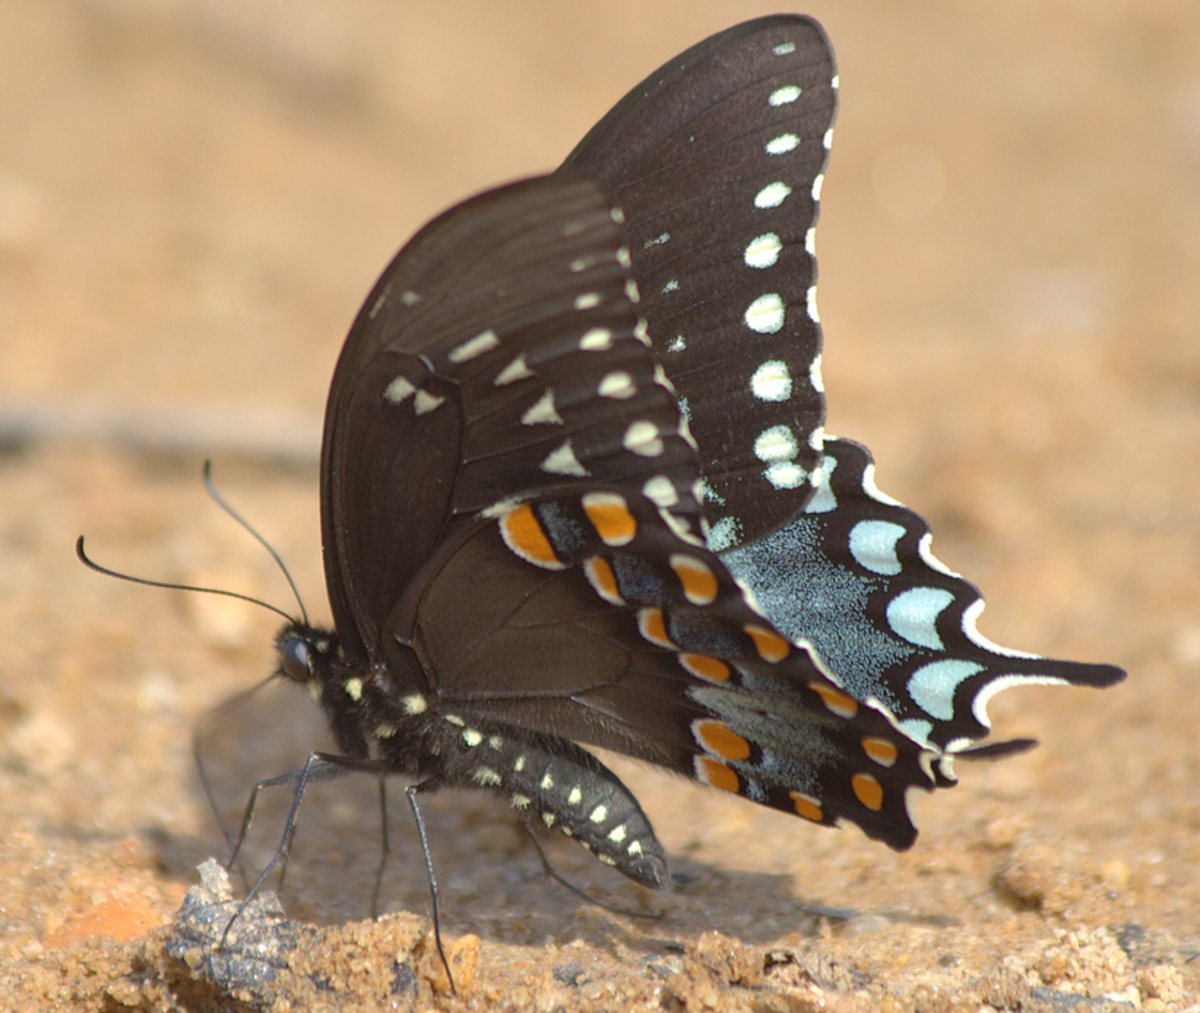 Spicebush swallowtail showing characteristic blue -green lunules on wing margins